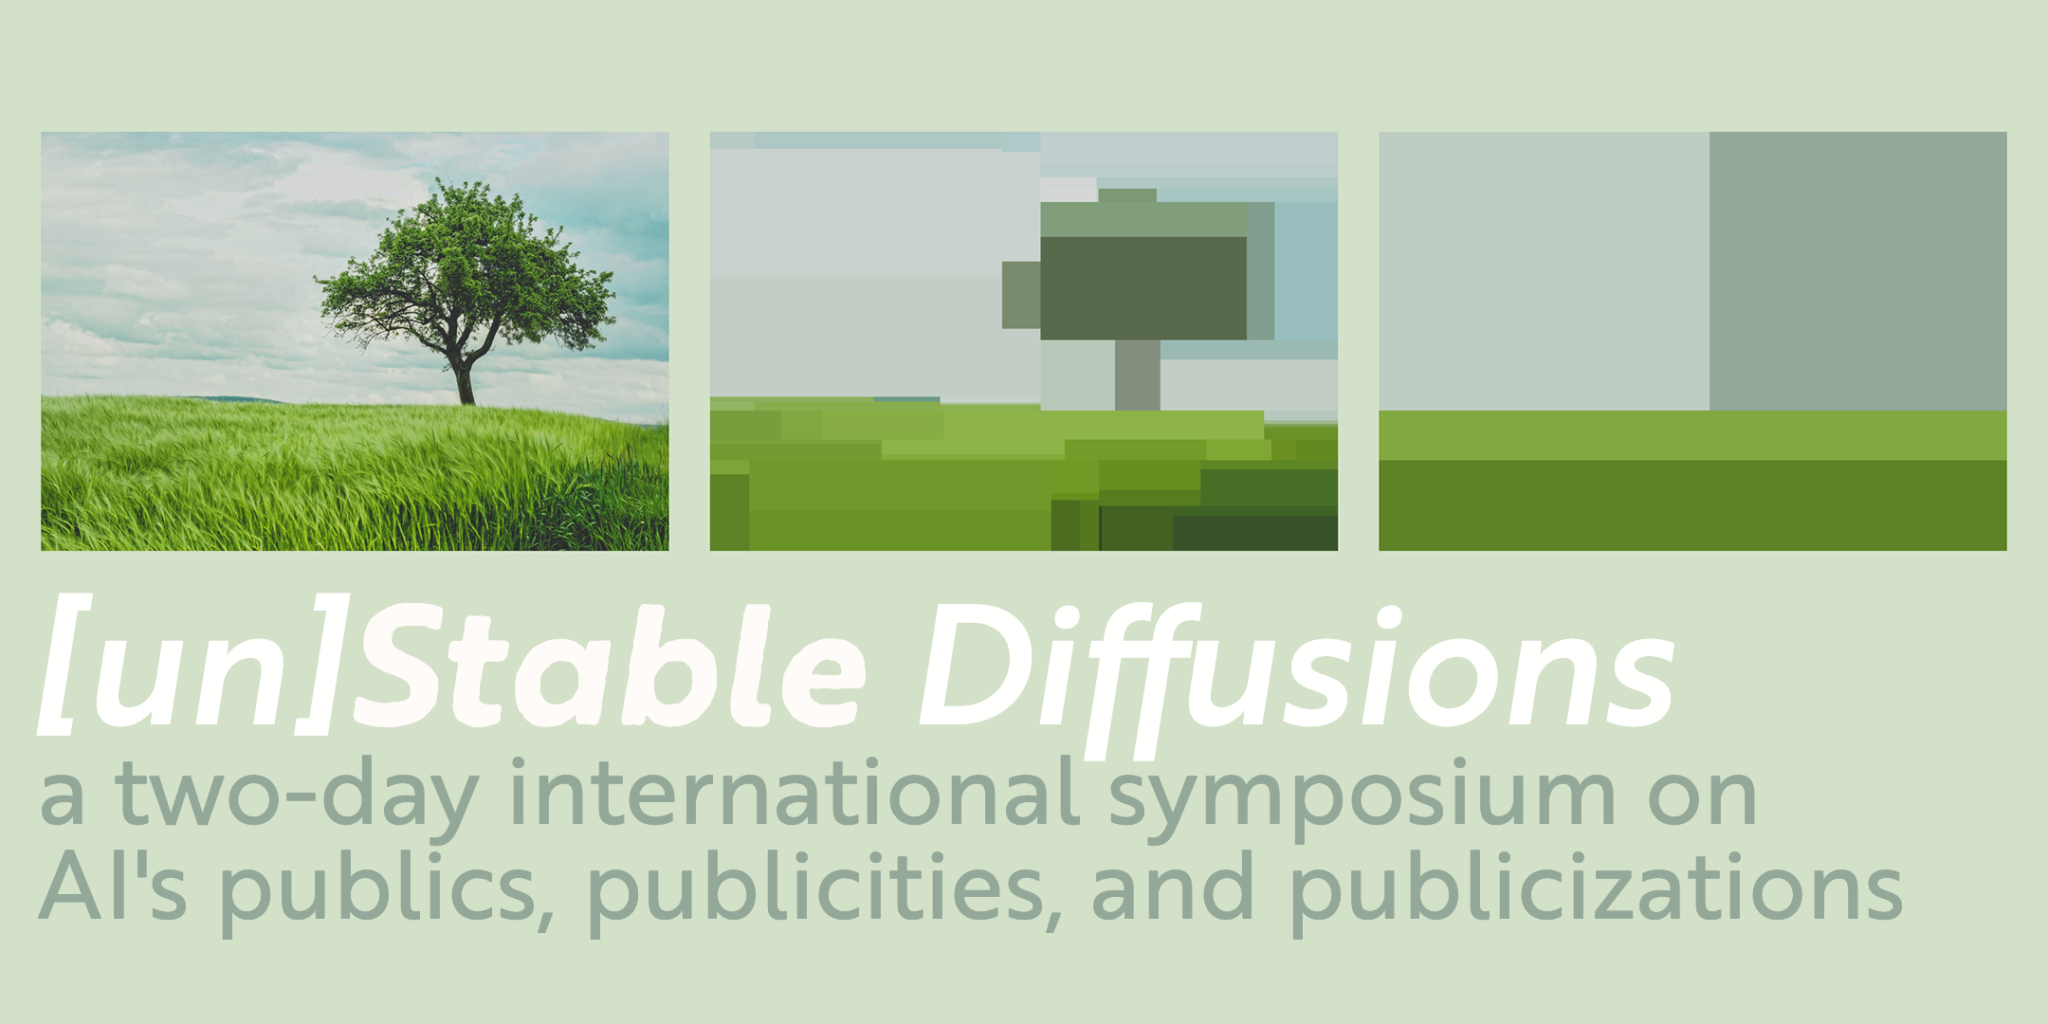 Conference poster for "Unstable diffusions" picturing layered renderings of a tree